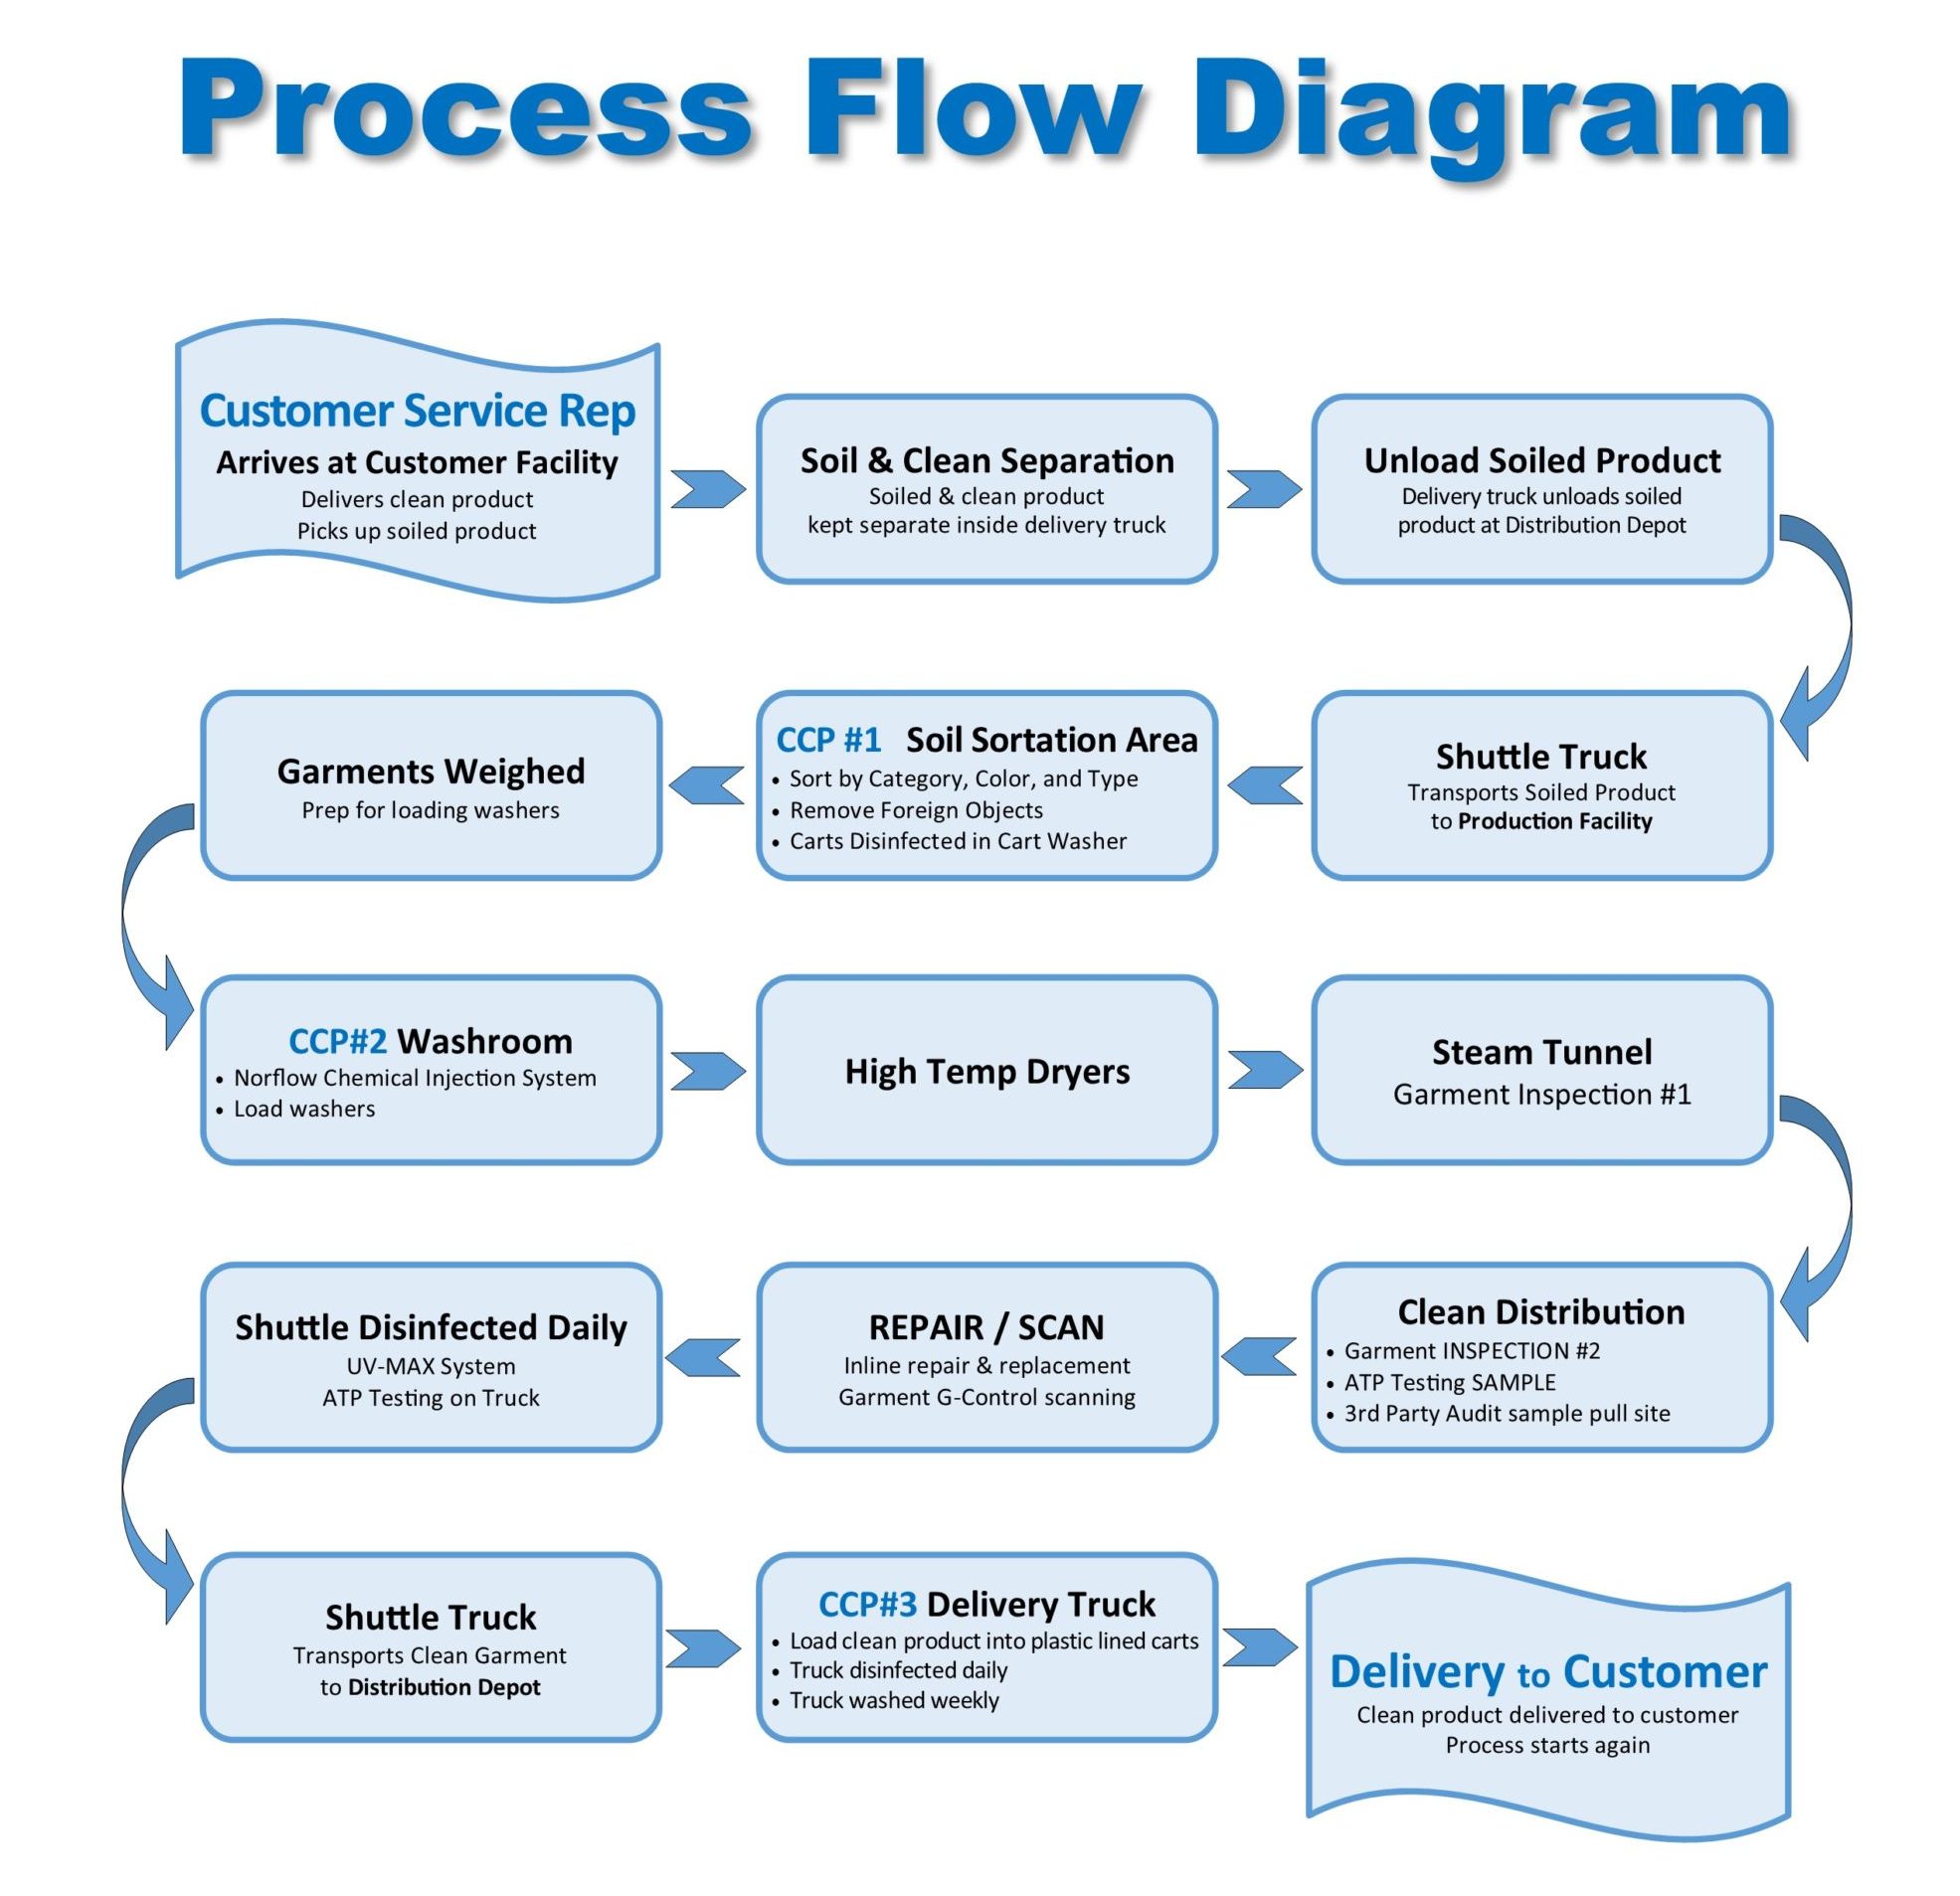 Process flow chart, laundry pick up to delivery food processing uniforms, supplement manufacturing uniforms, cosmetic manufacturing uniforms